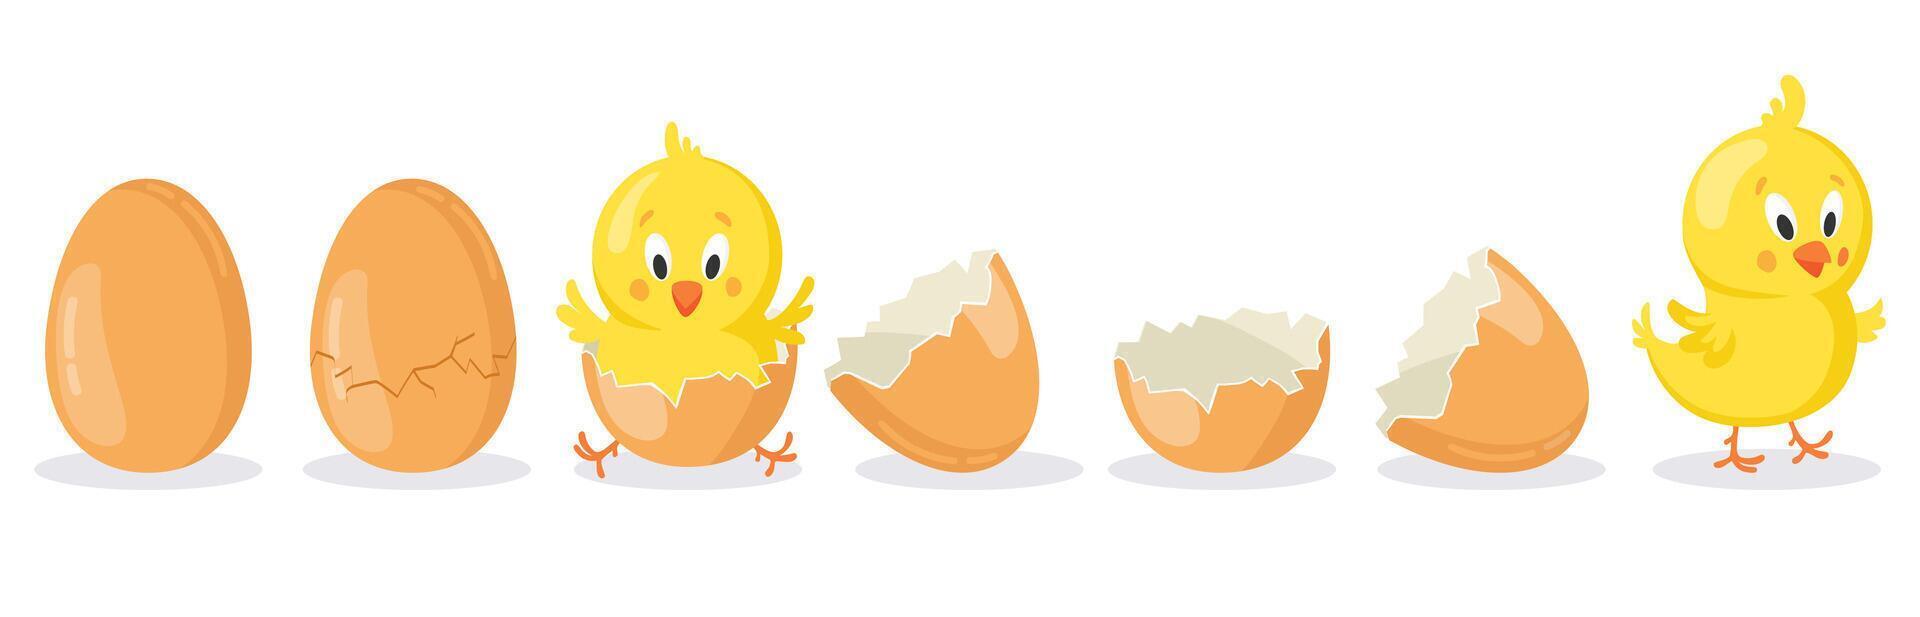 Cartoon hatched easter egg. Cracked chicken eggs with cute chicken mascot, newborn baby chick bird hatching from egg vector illustration set